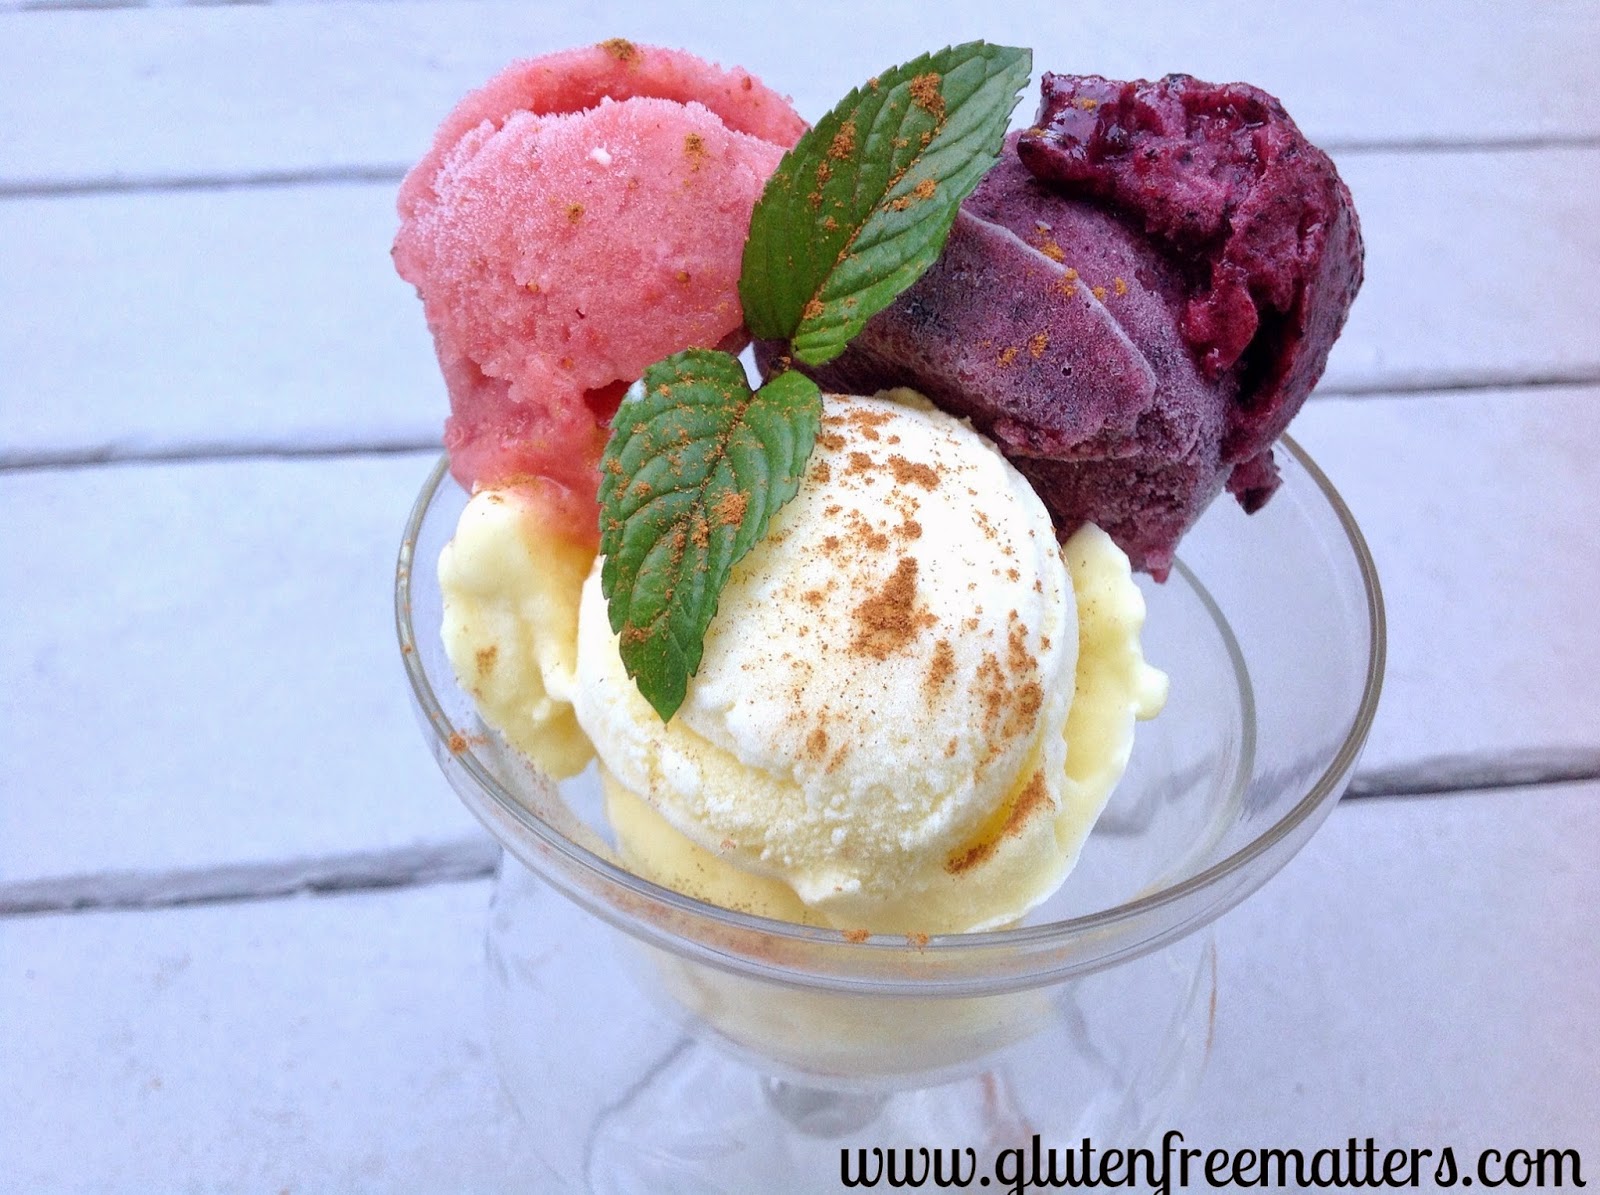 blueberry, strawberry, and mango sorbet with cinnamon